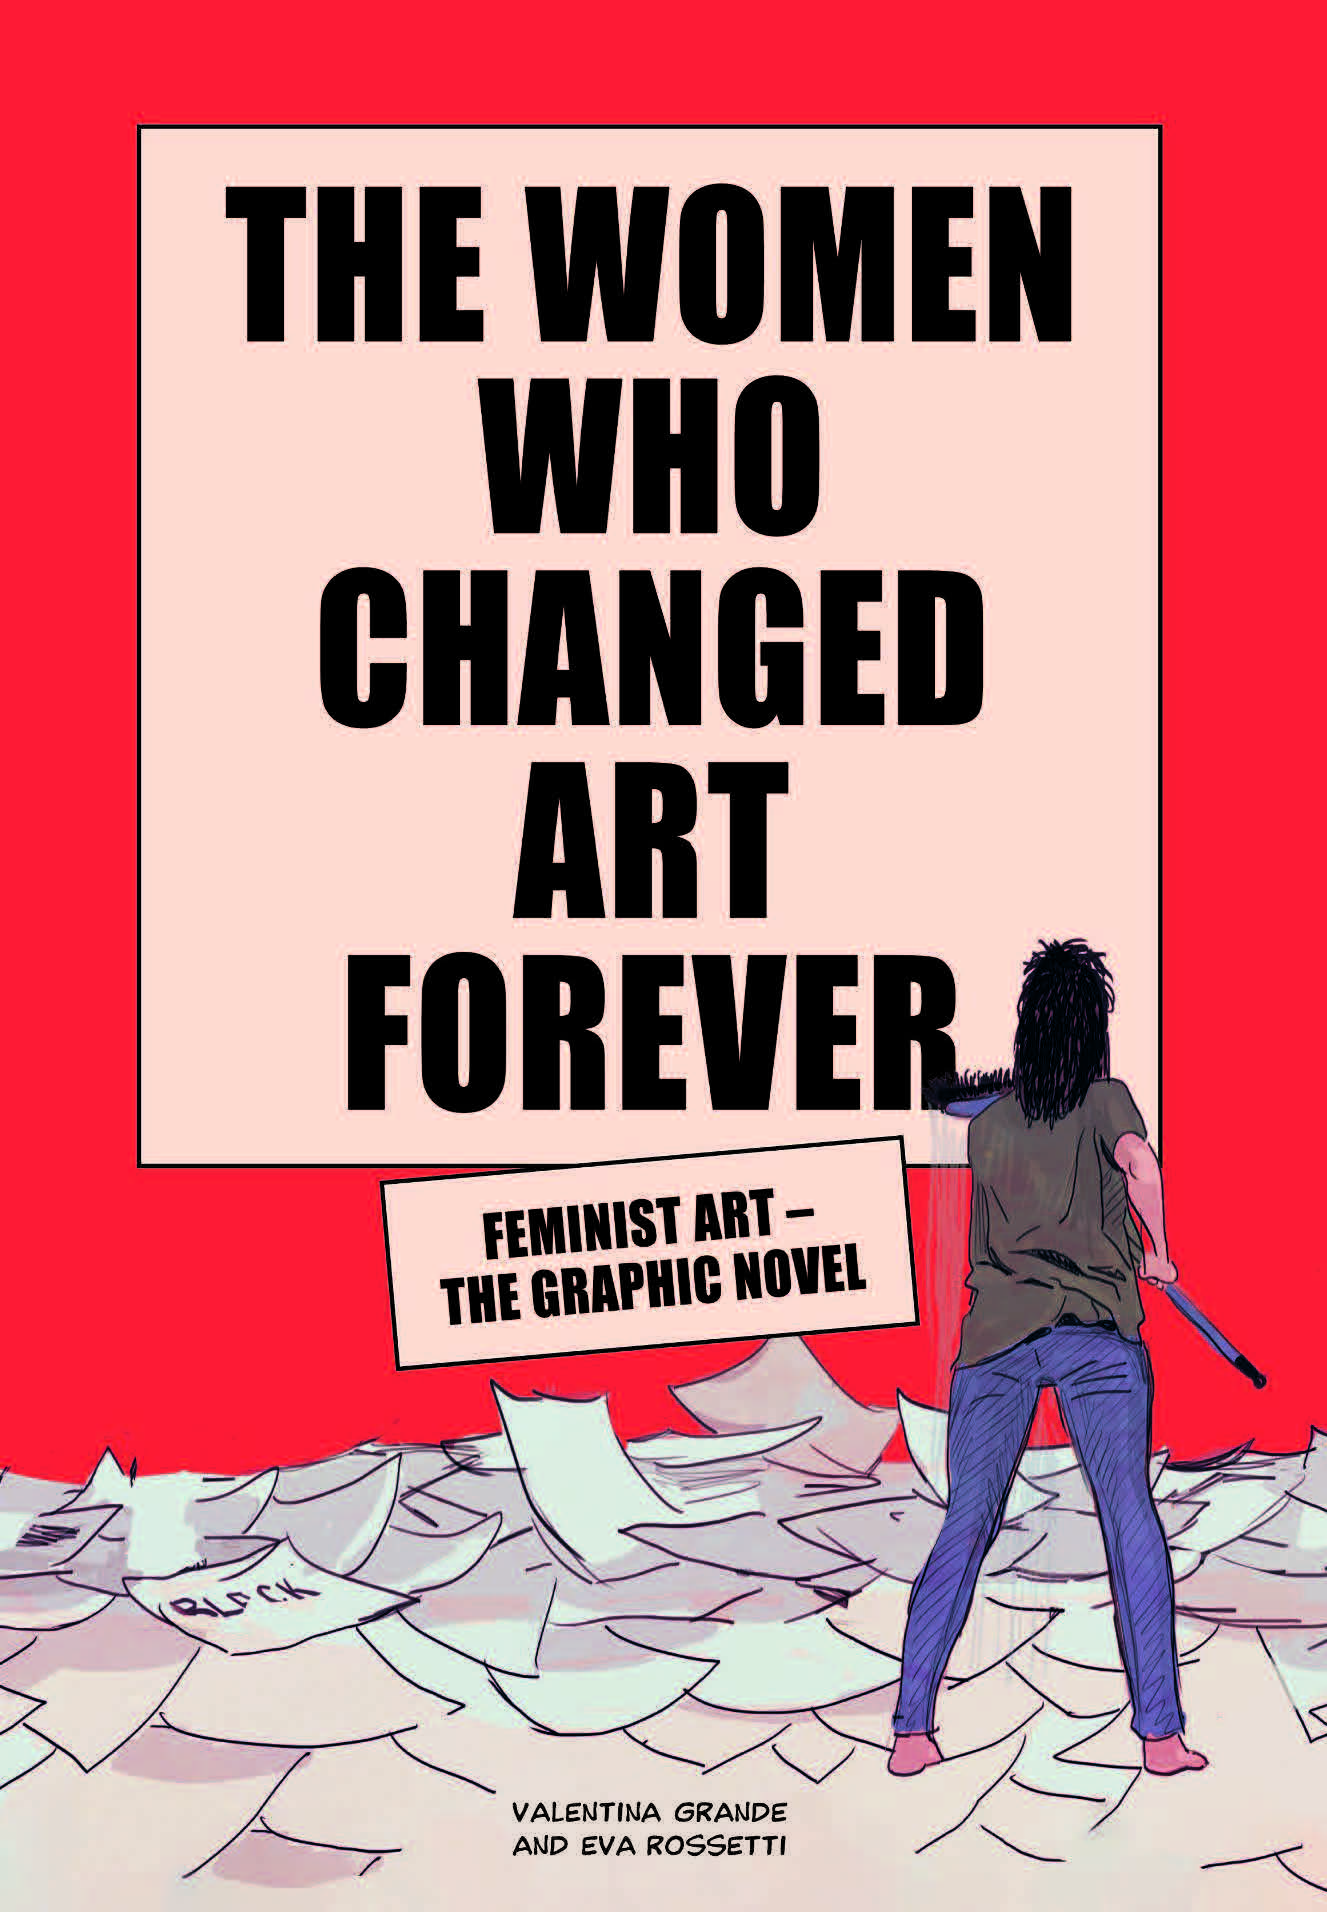 A New Graphic Novel Tells The Origin Stories Of The Superheroes Of Feminist Art History—see